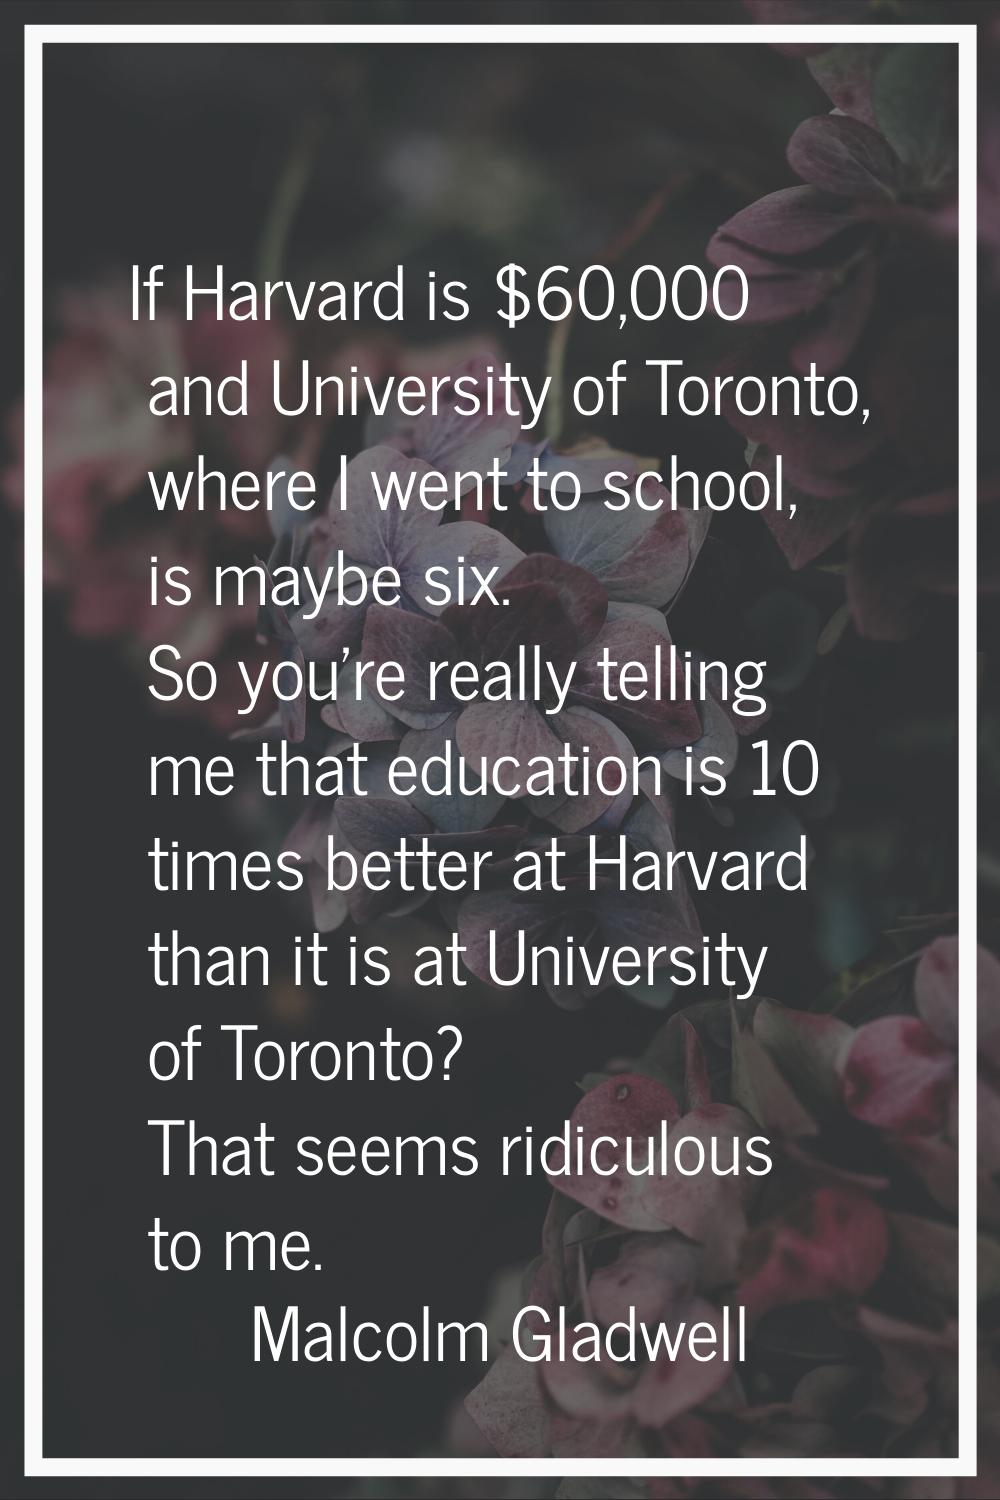 If Harvard is $60,000 and University of Toronto, where I went to school, is maybe six. So you're re